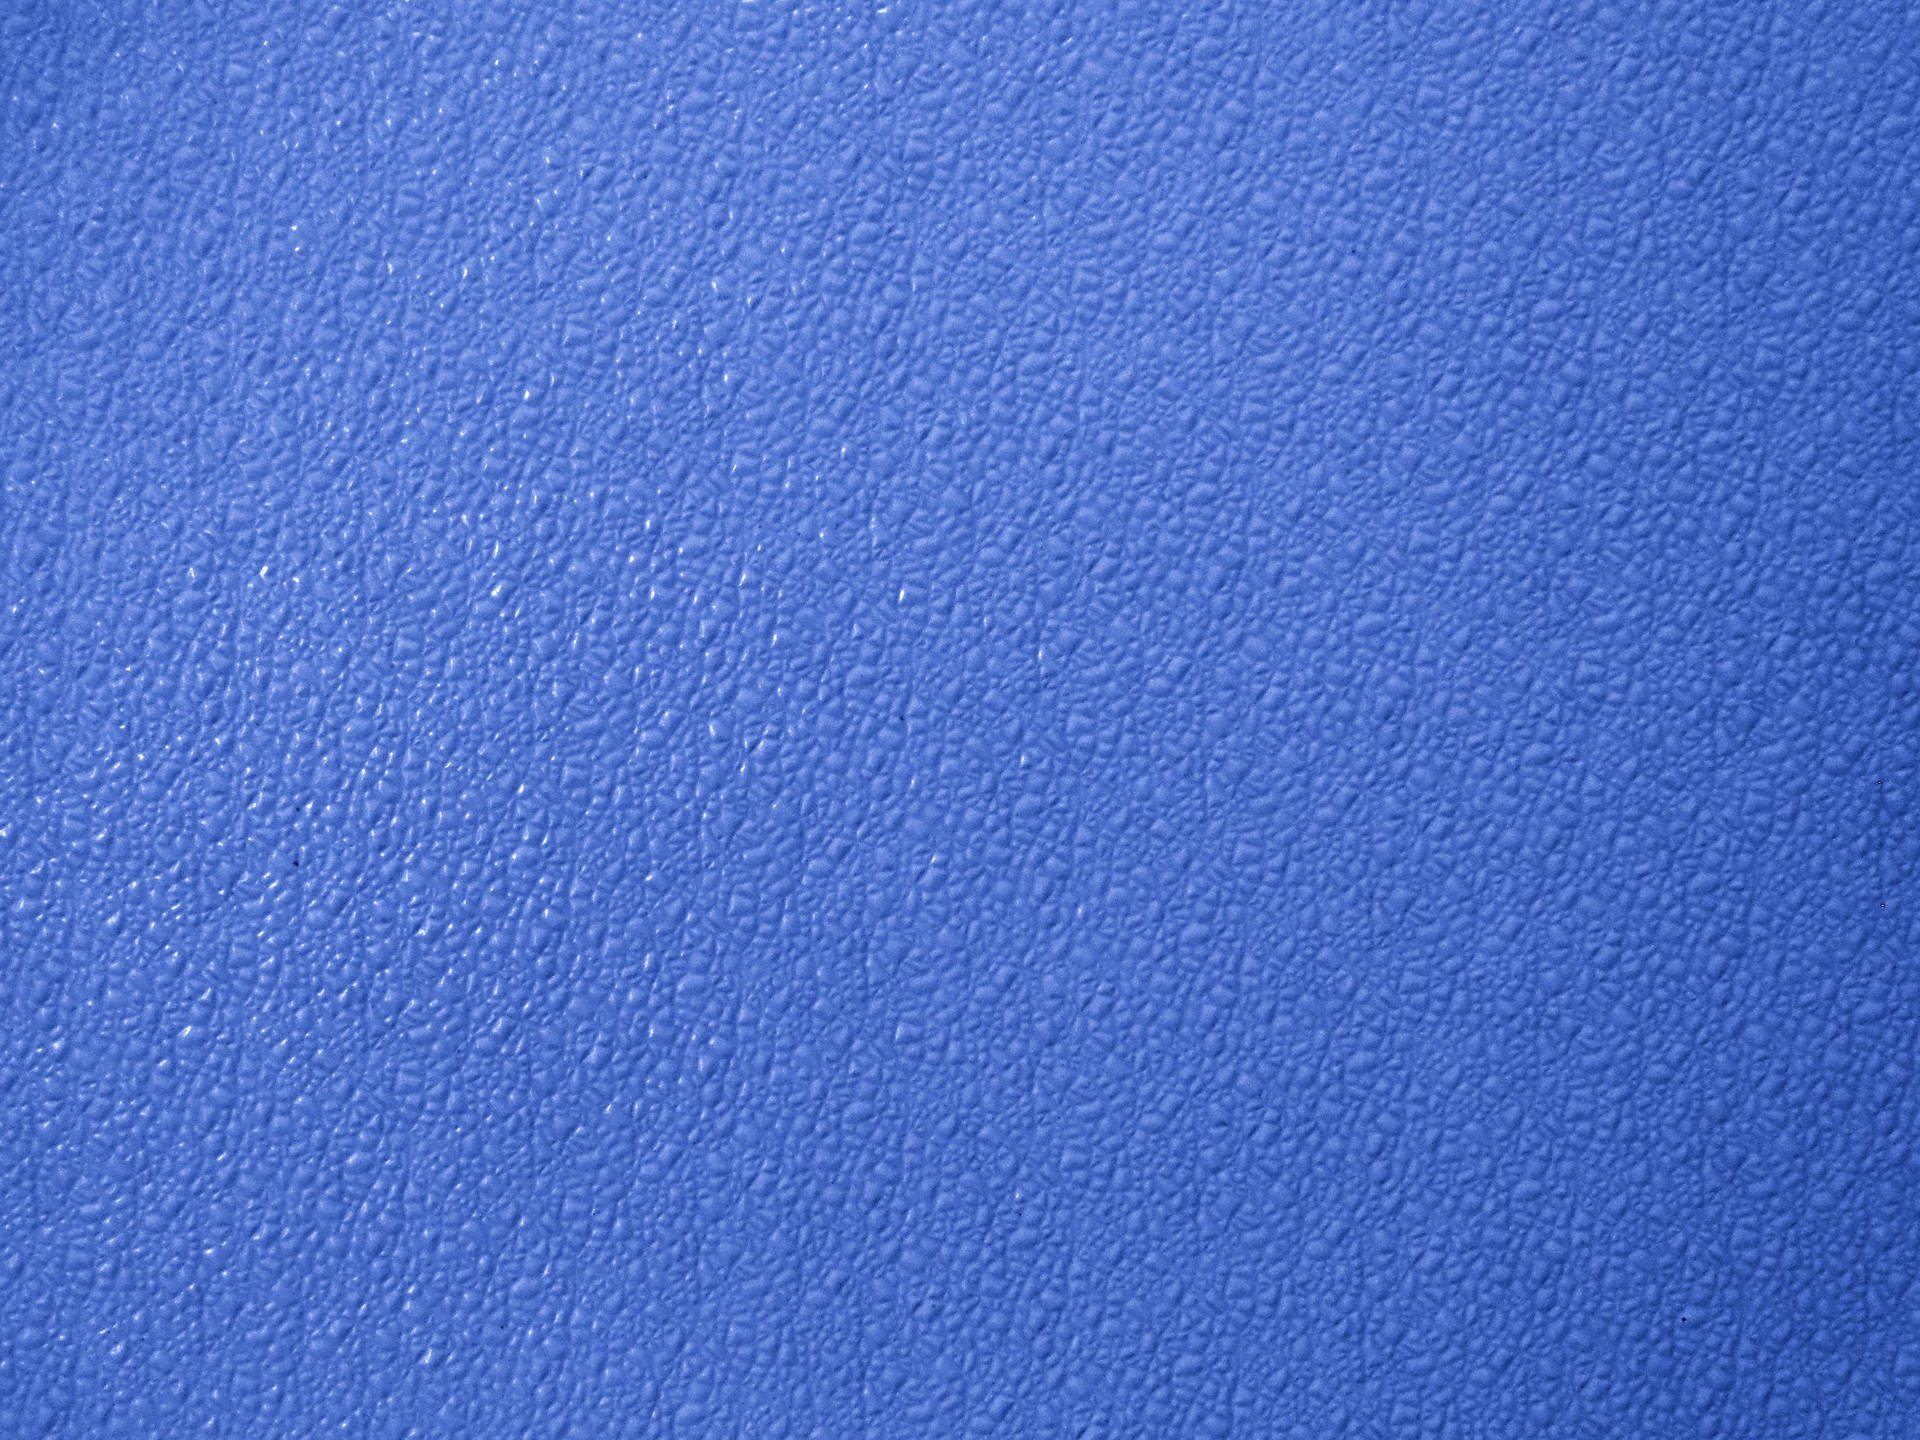 Periwinkle Blue Leather Texture